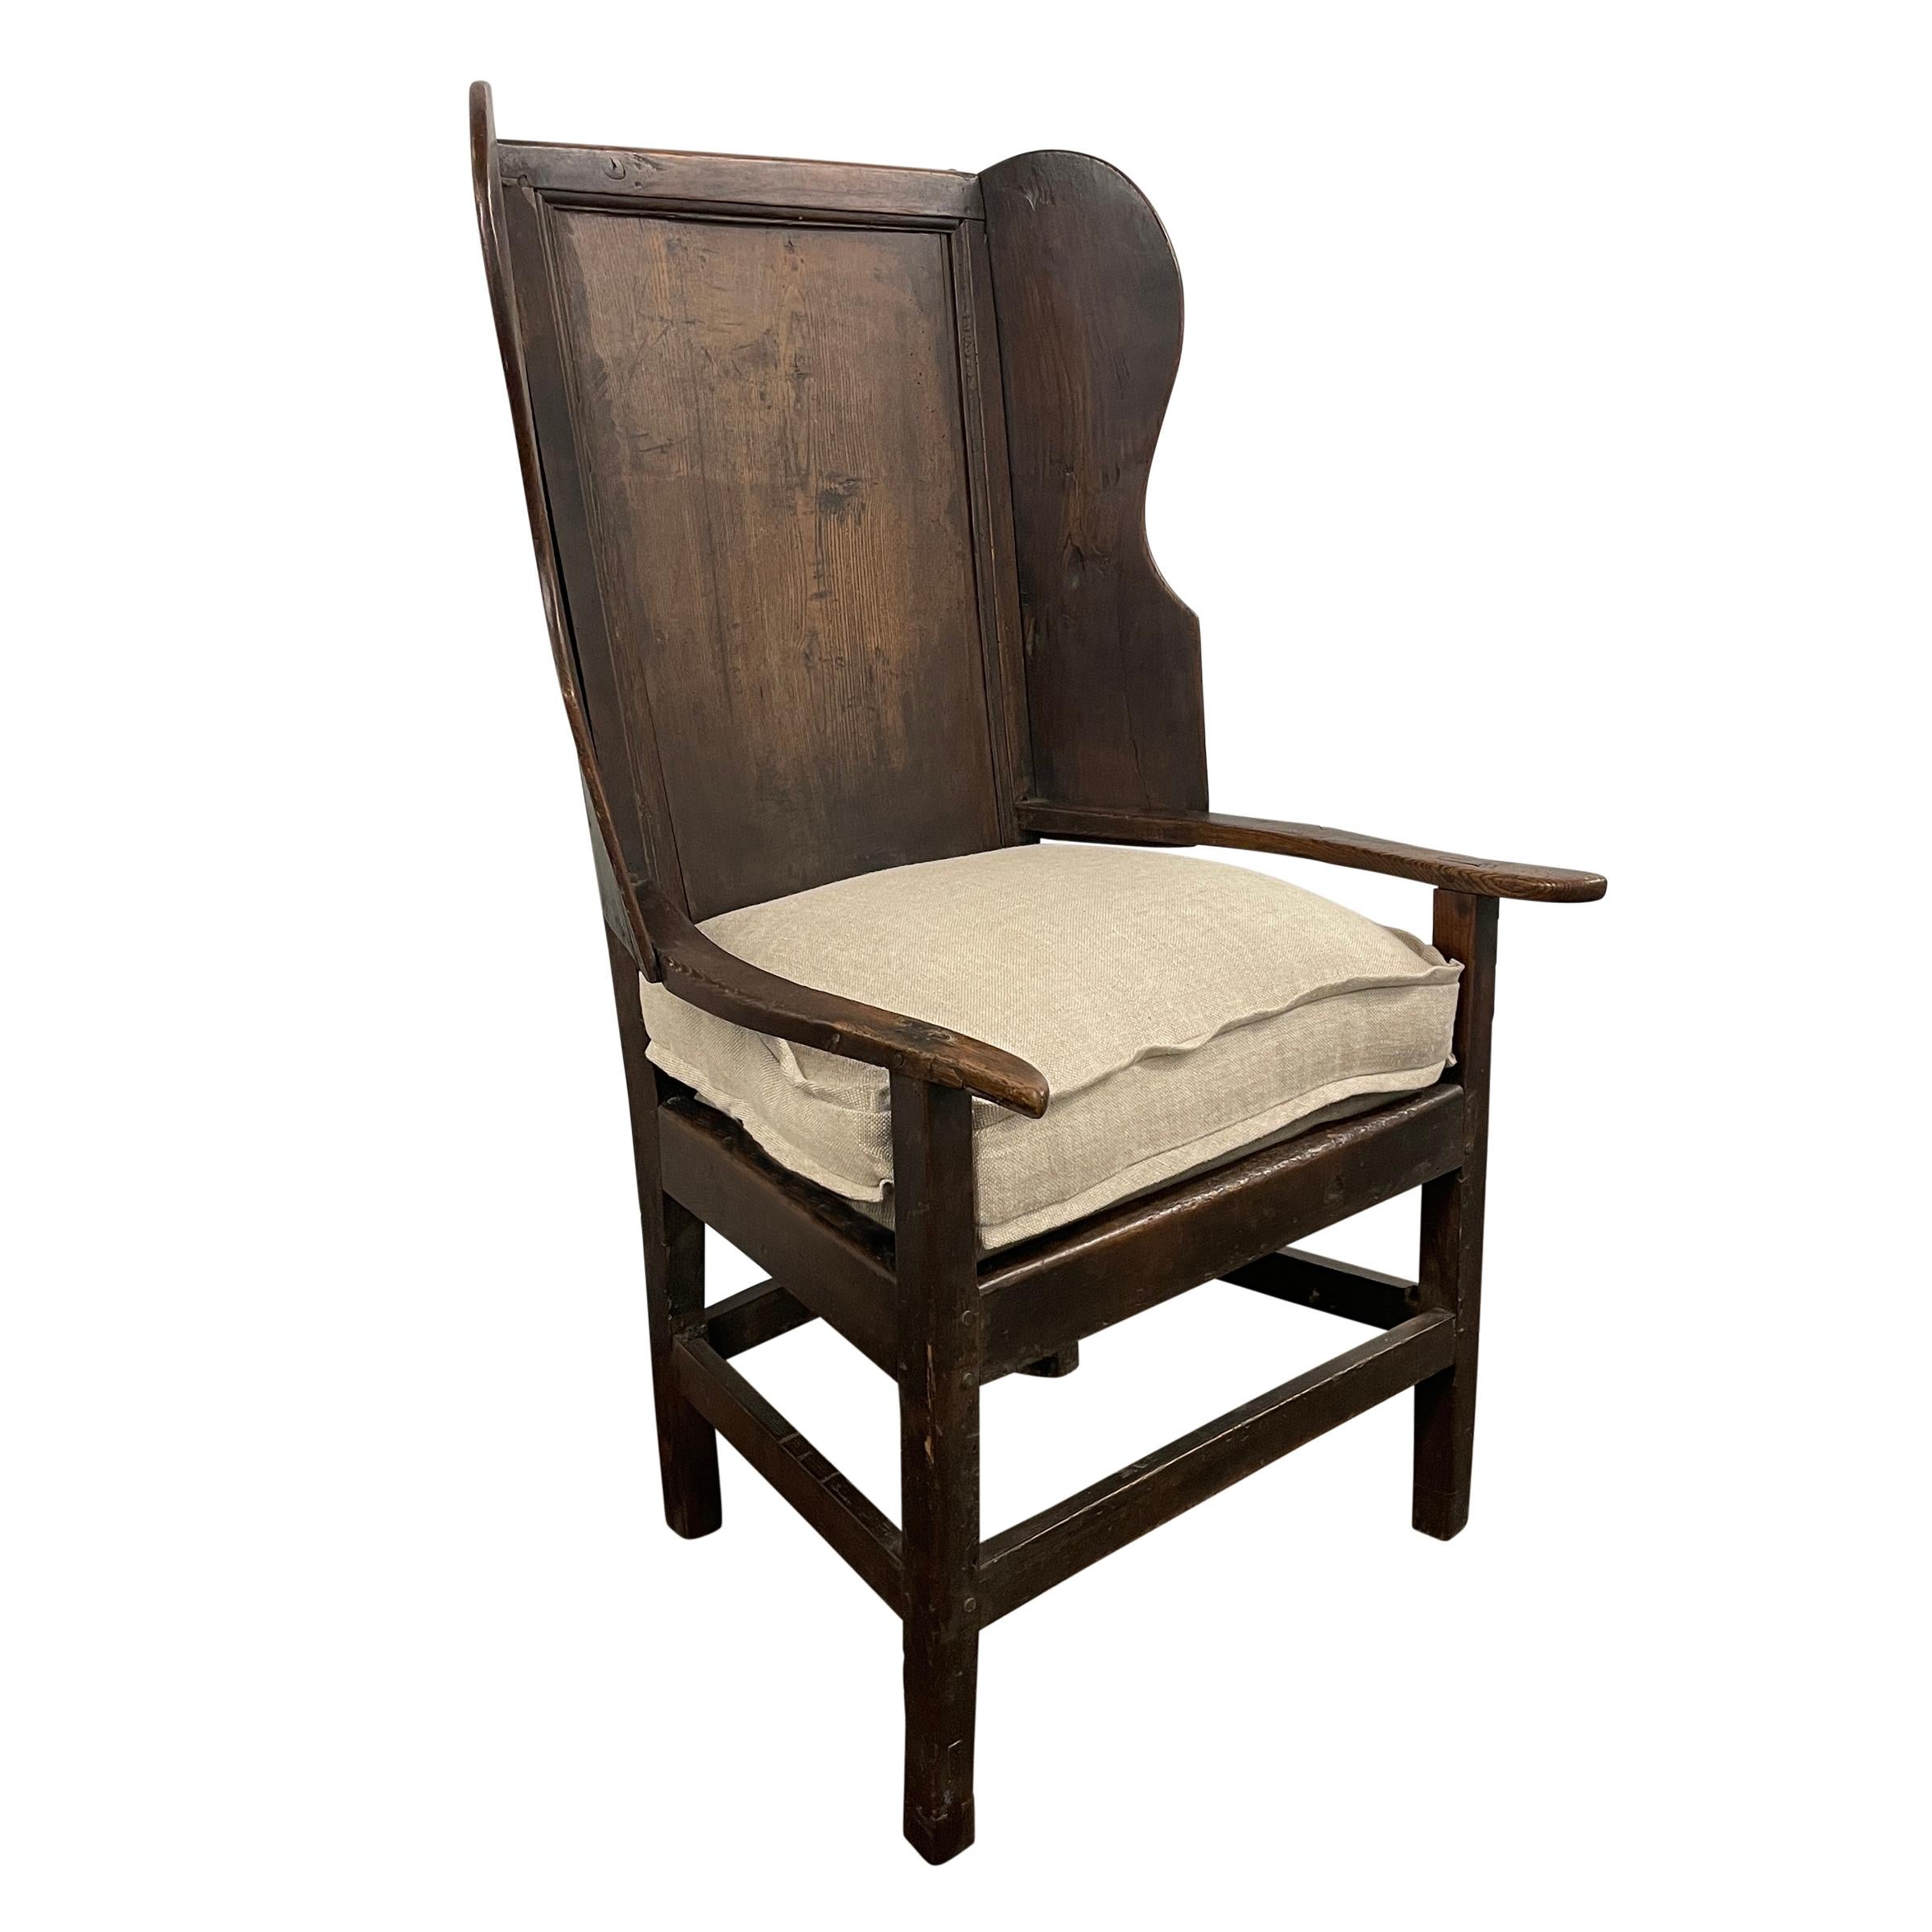 Rustic Early 18th Century English Wingchair